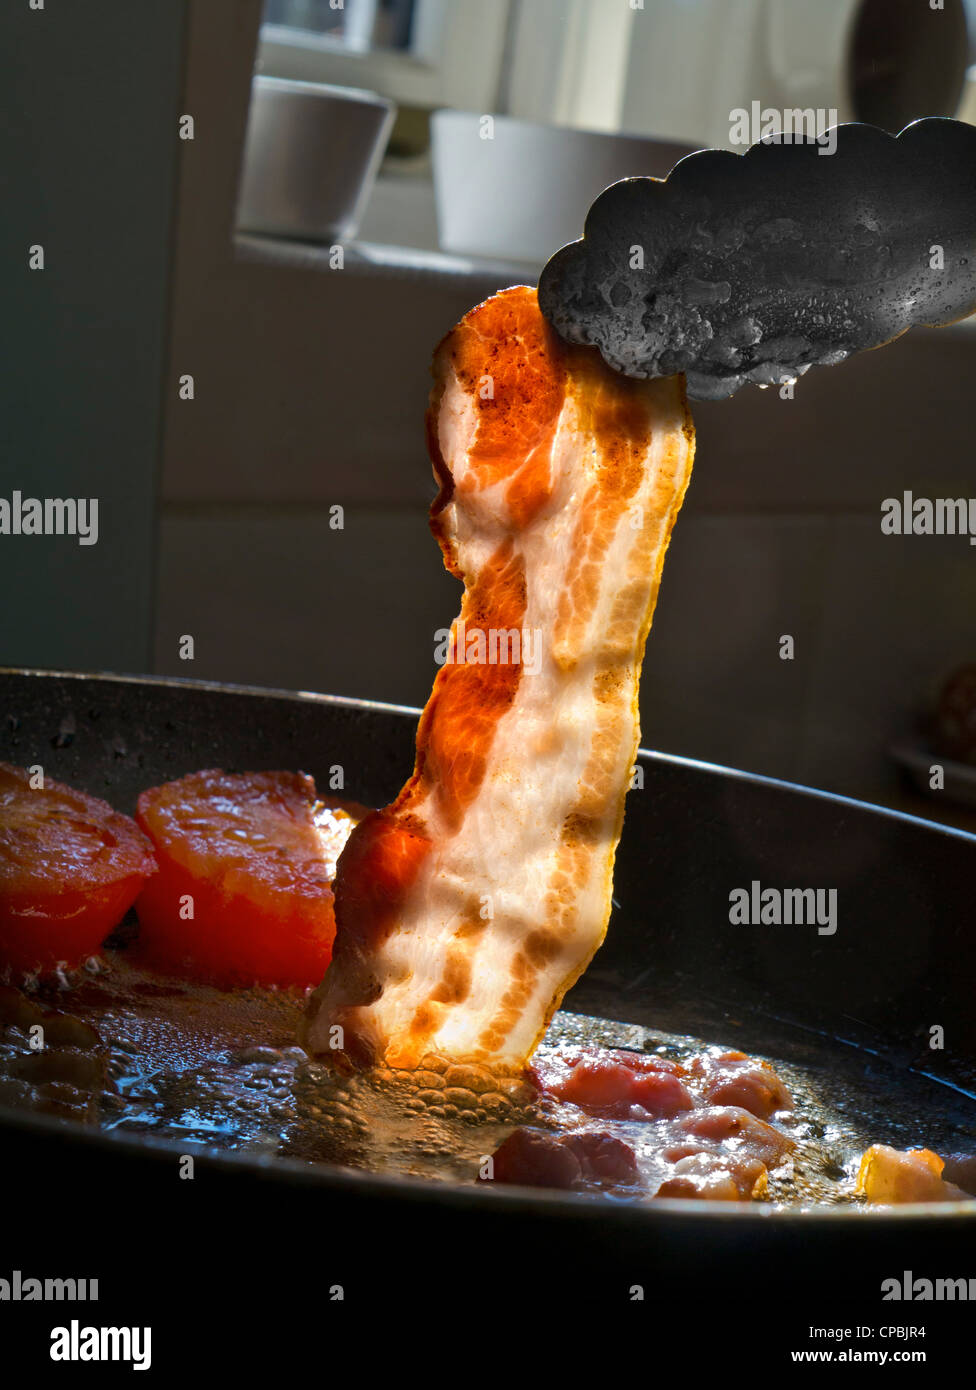 STREAKY BACON FRYING PAN KITCHEN in sunlight illuminating a  rasher of organic streaky bacon being placed into a hot frying pan containing tomatoes Stock Photo